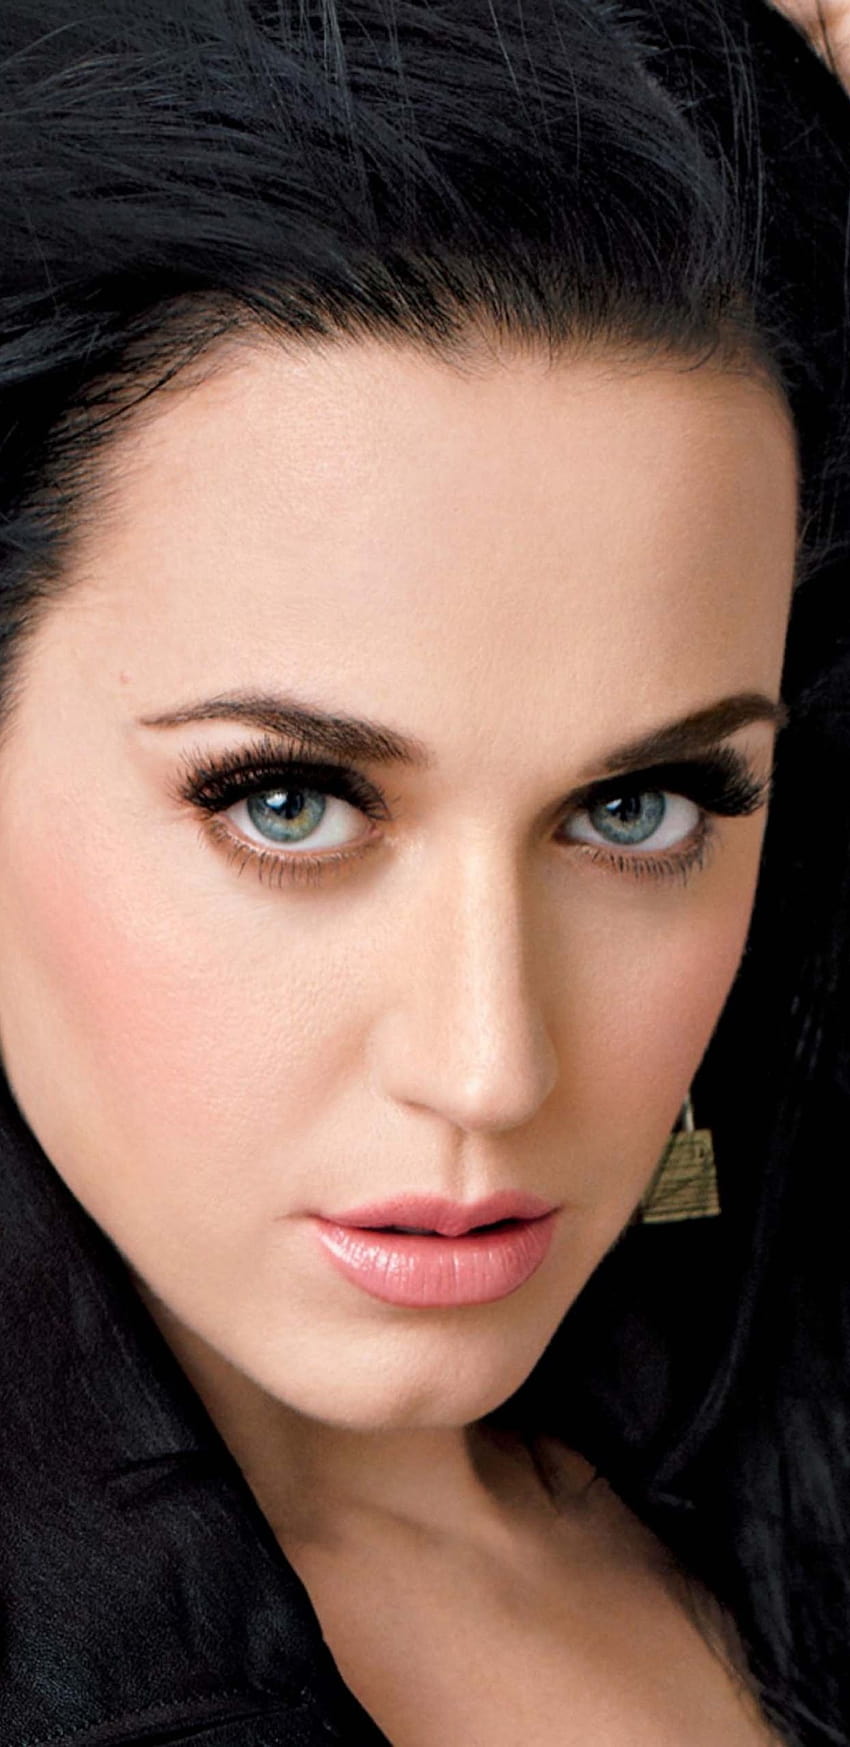 1440x2960 Katy Perry Face And Eyes Samsung Galaxy Note 9,8, S9,S8, katy perry close up HD phone wallpaper